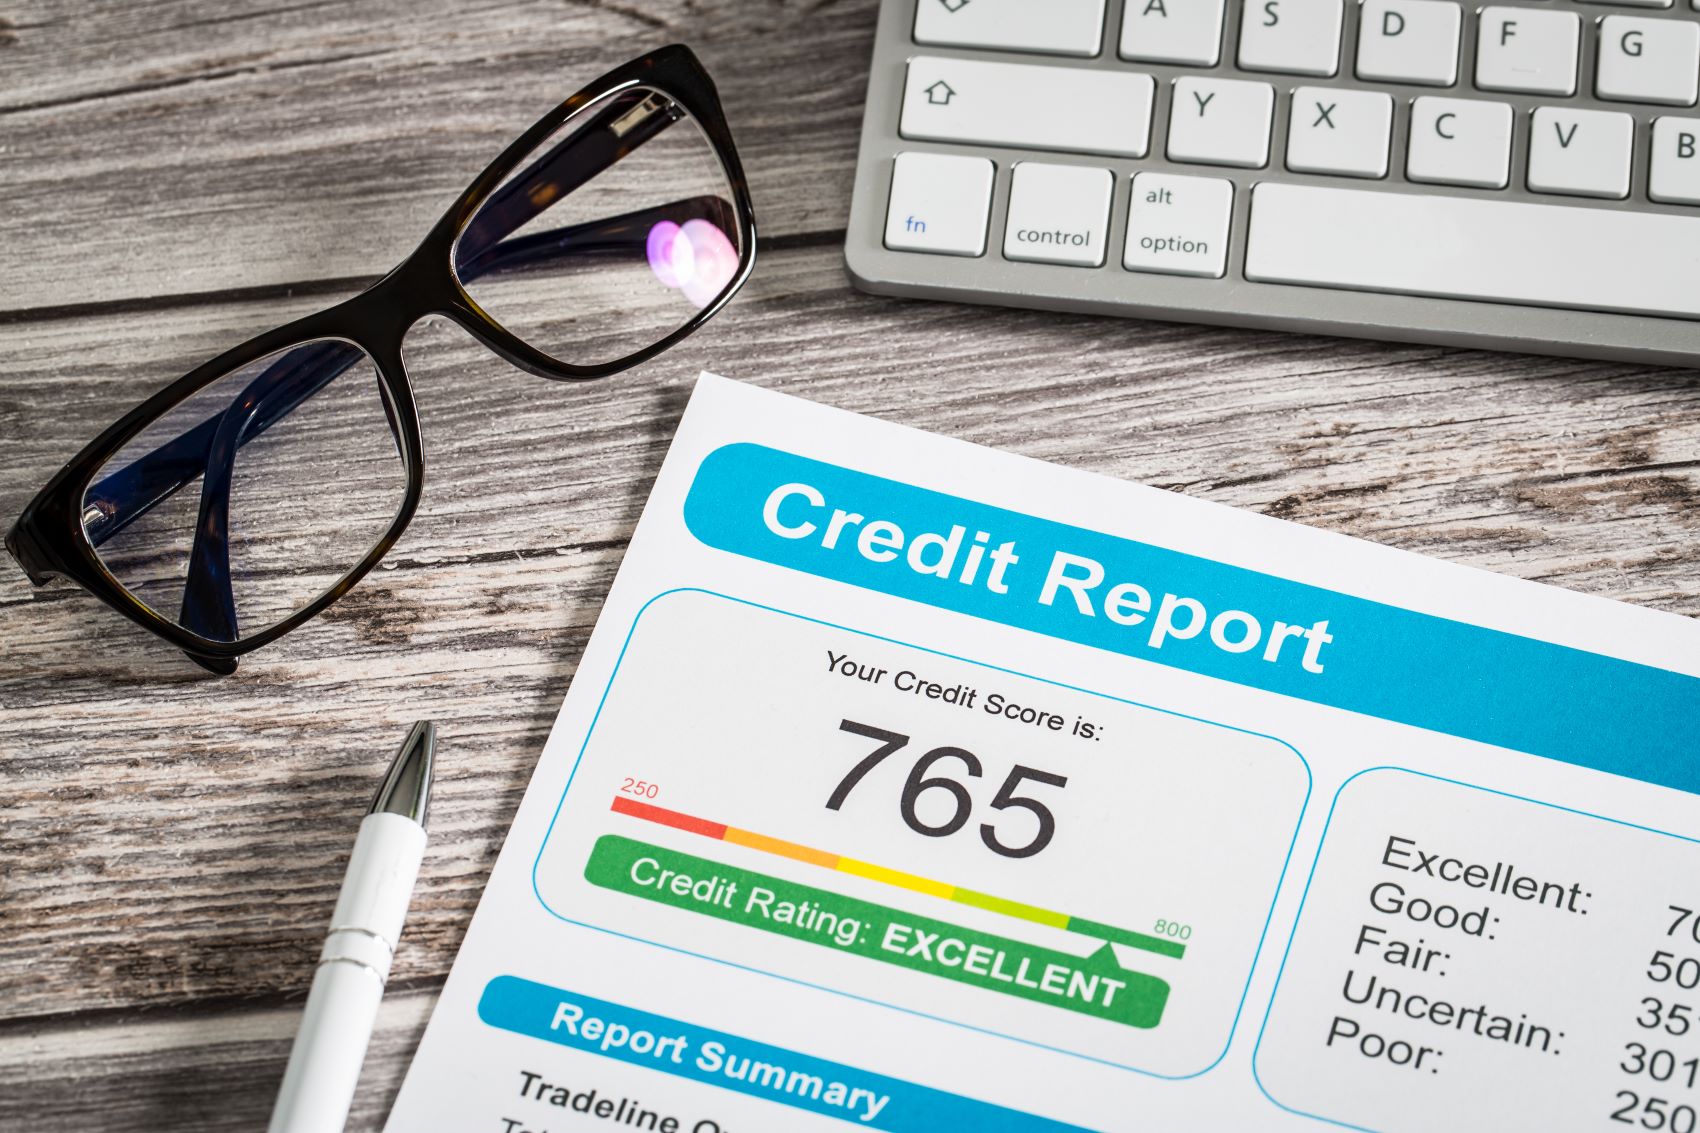 Real time credit score